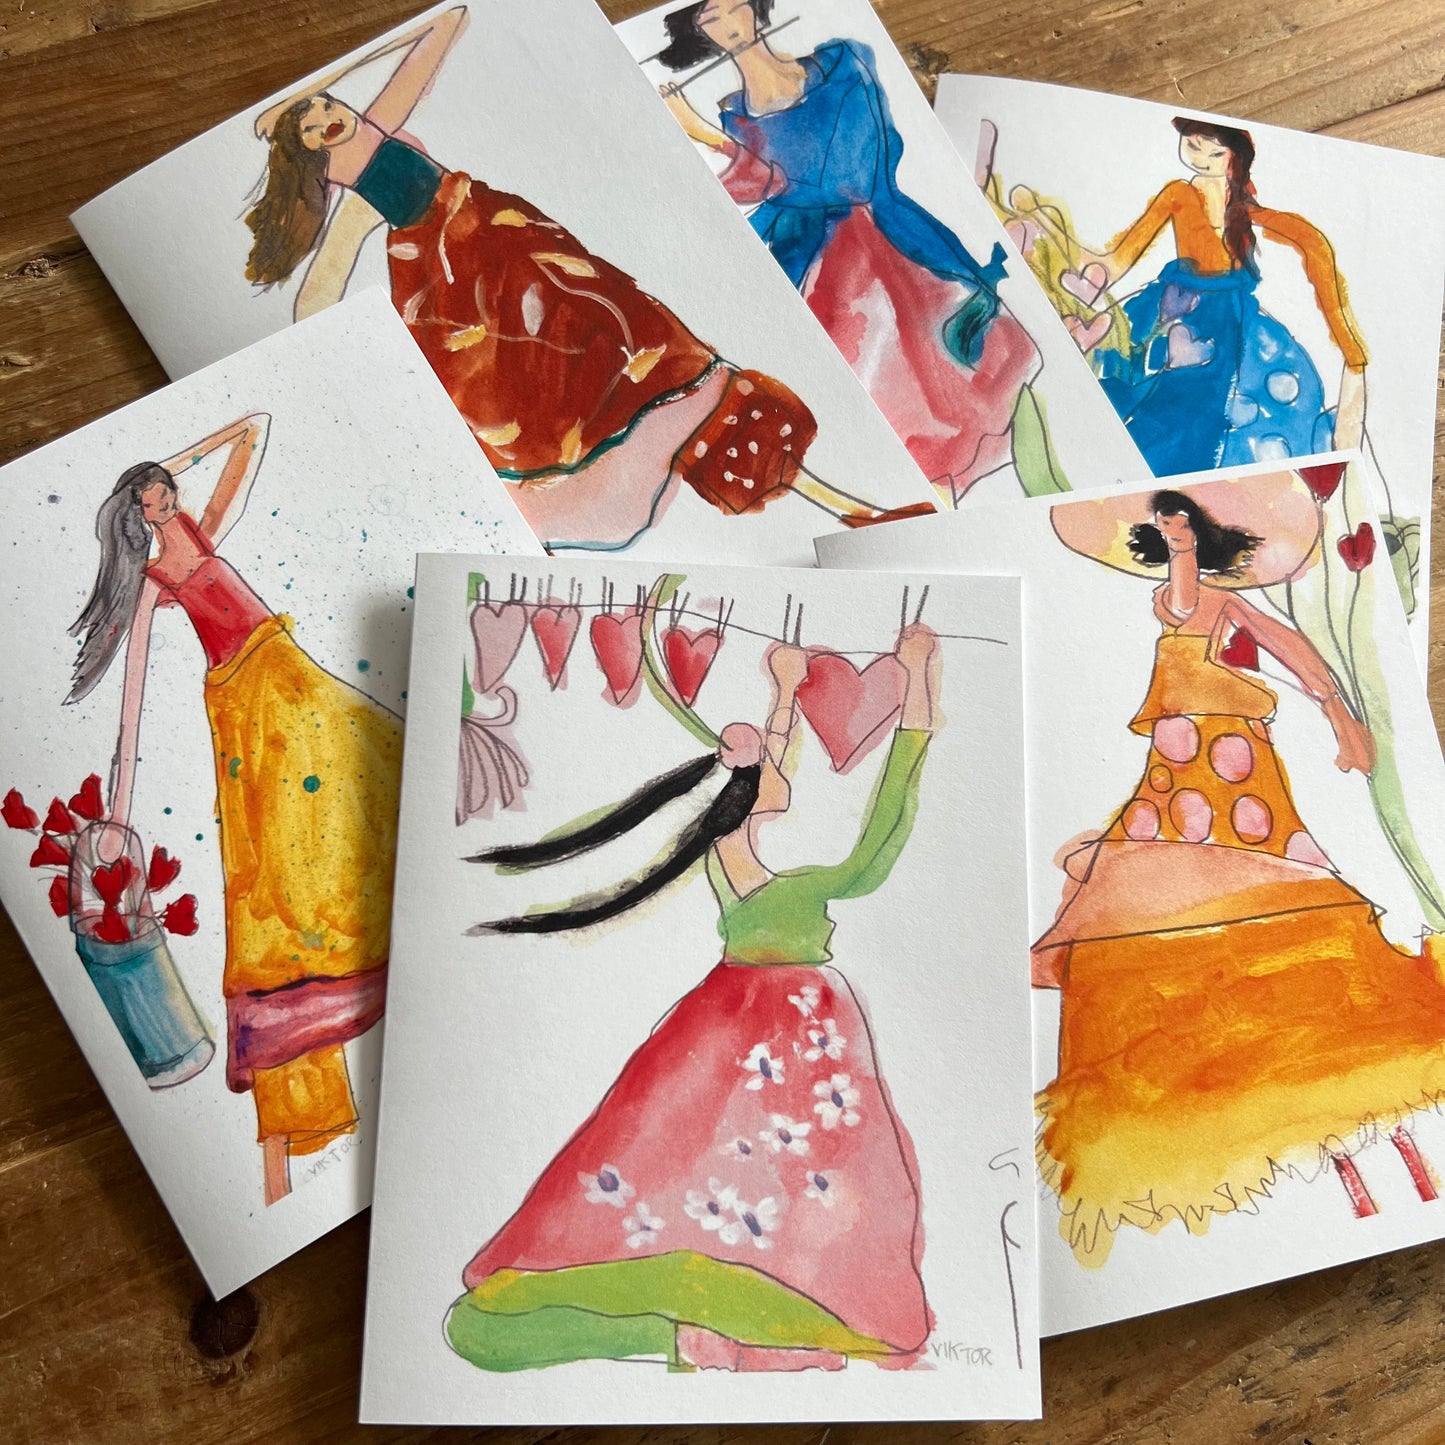 Cards For Her - Greeting cards